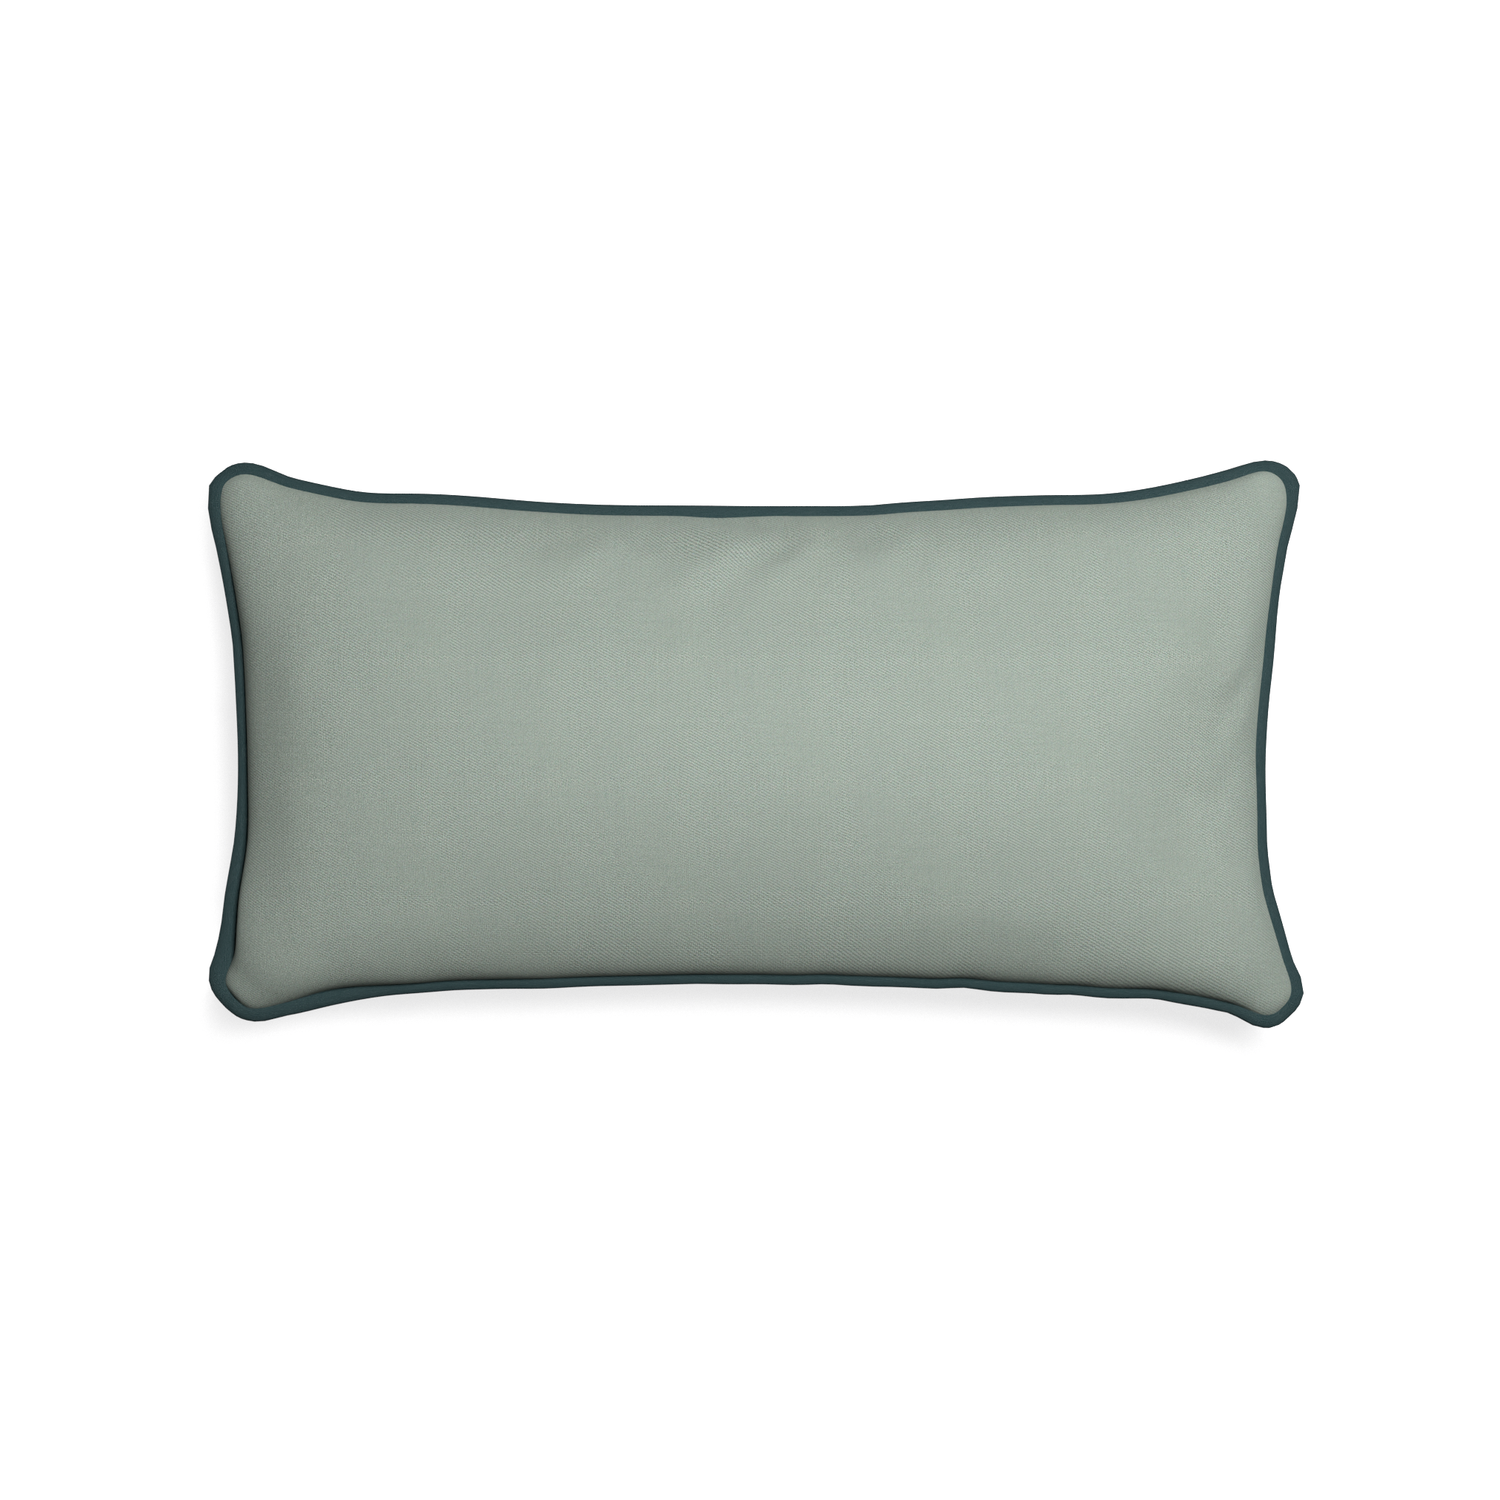 Midi-lumbar sage custom sage green cottonpillow with p piping on white background